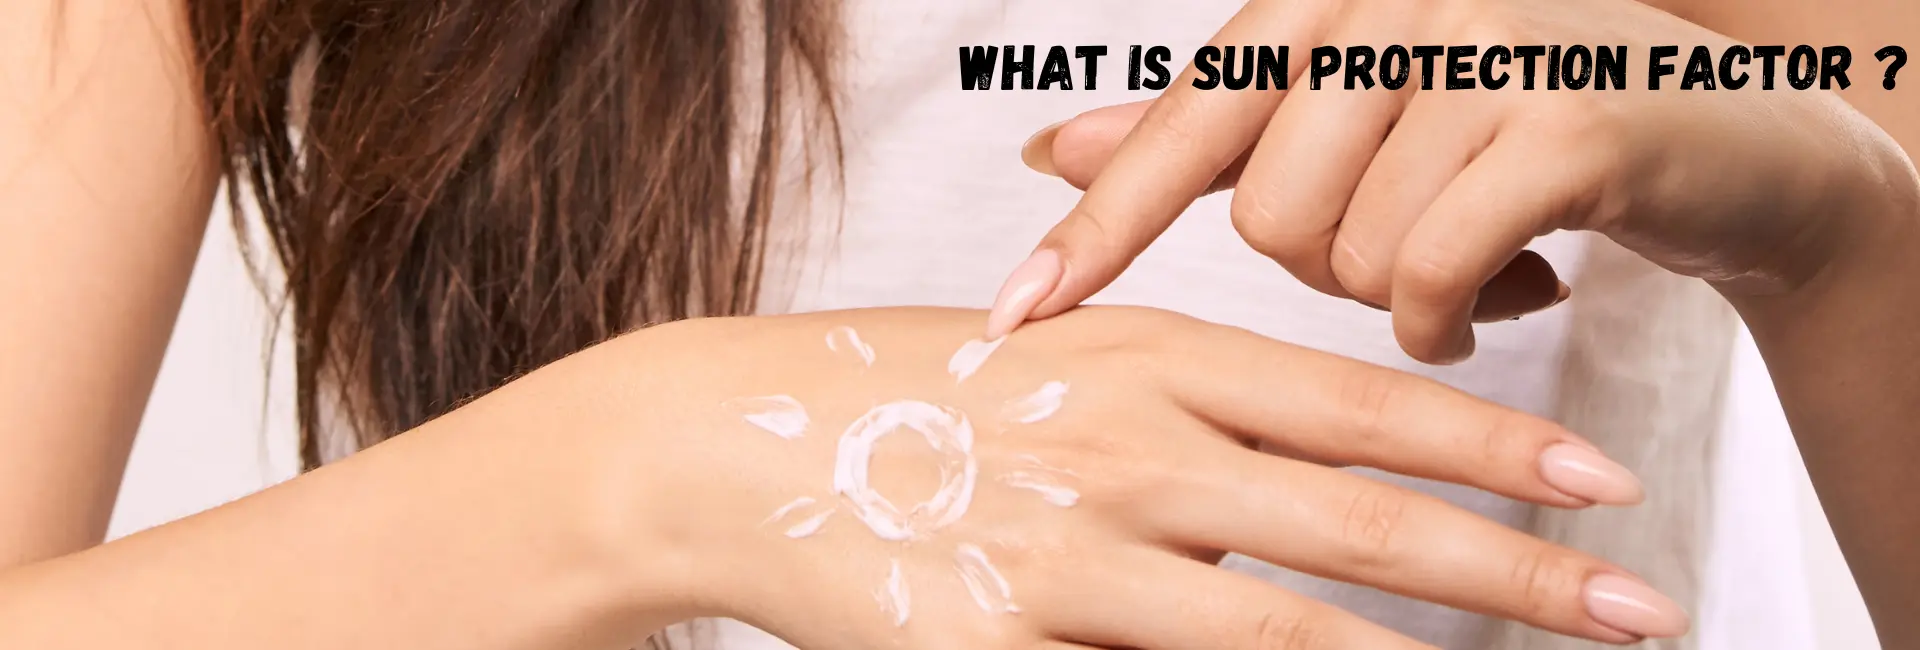 What is Sun Protection Factor (SPF)  Sunscreen? | Testing & Explain